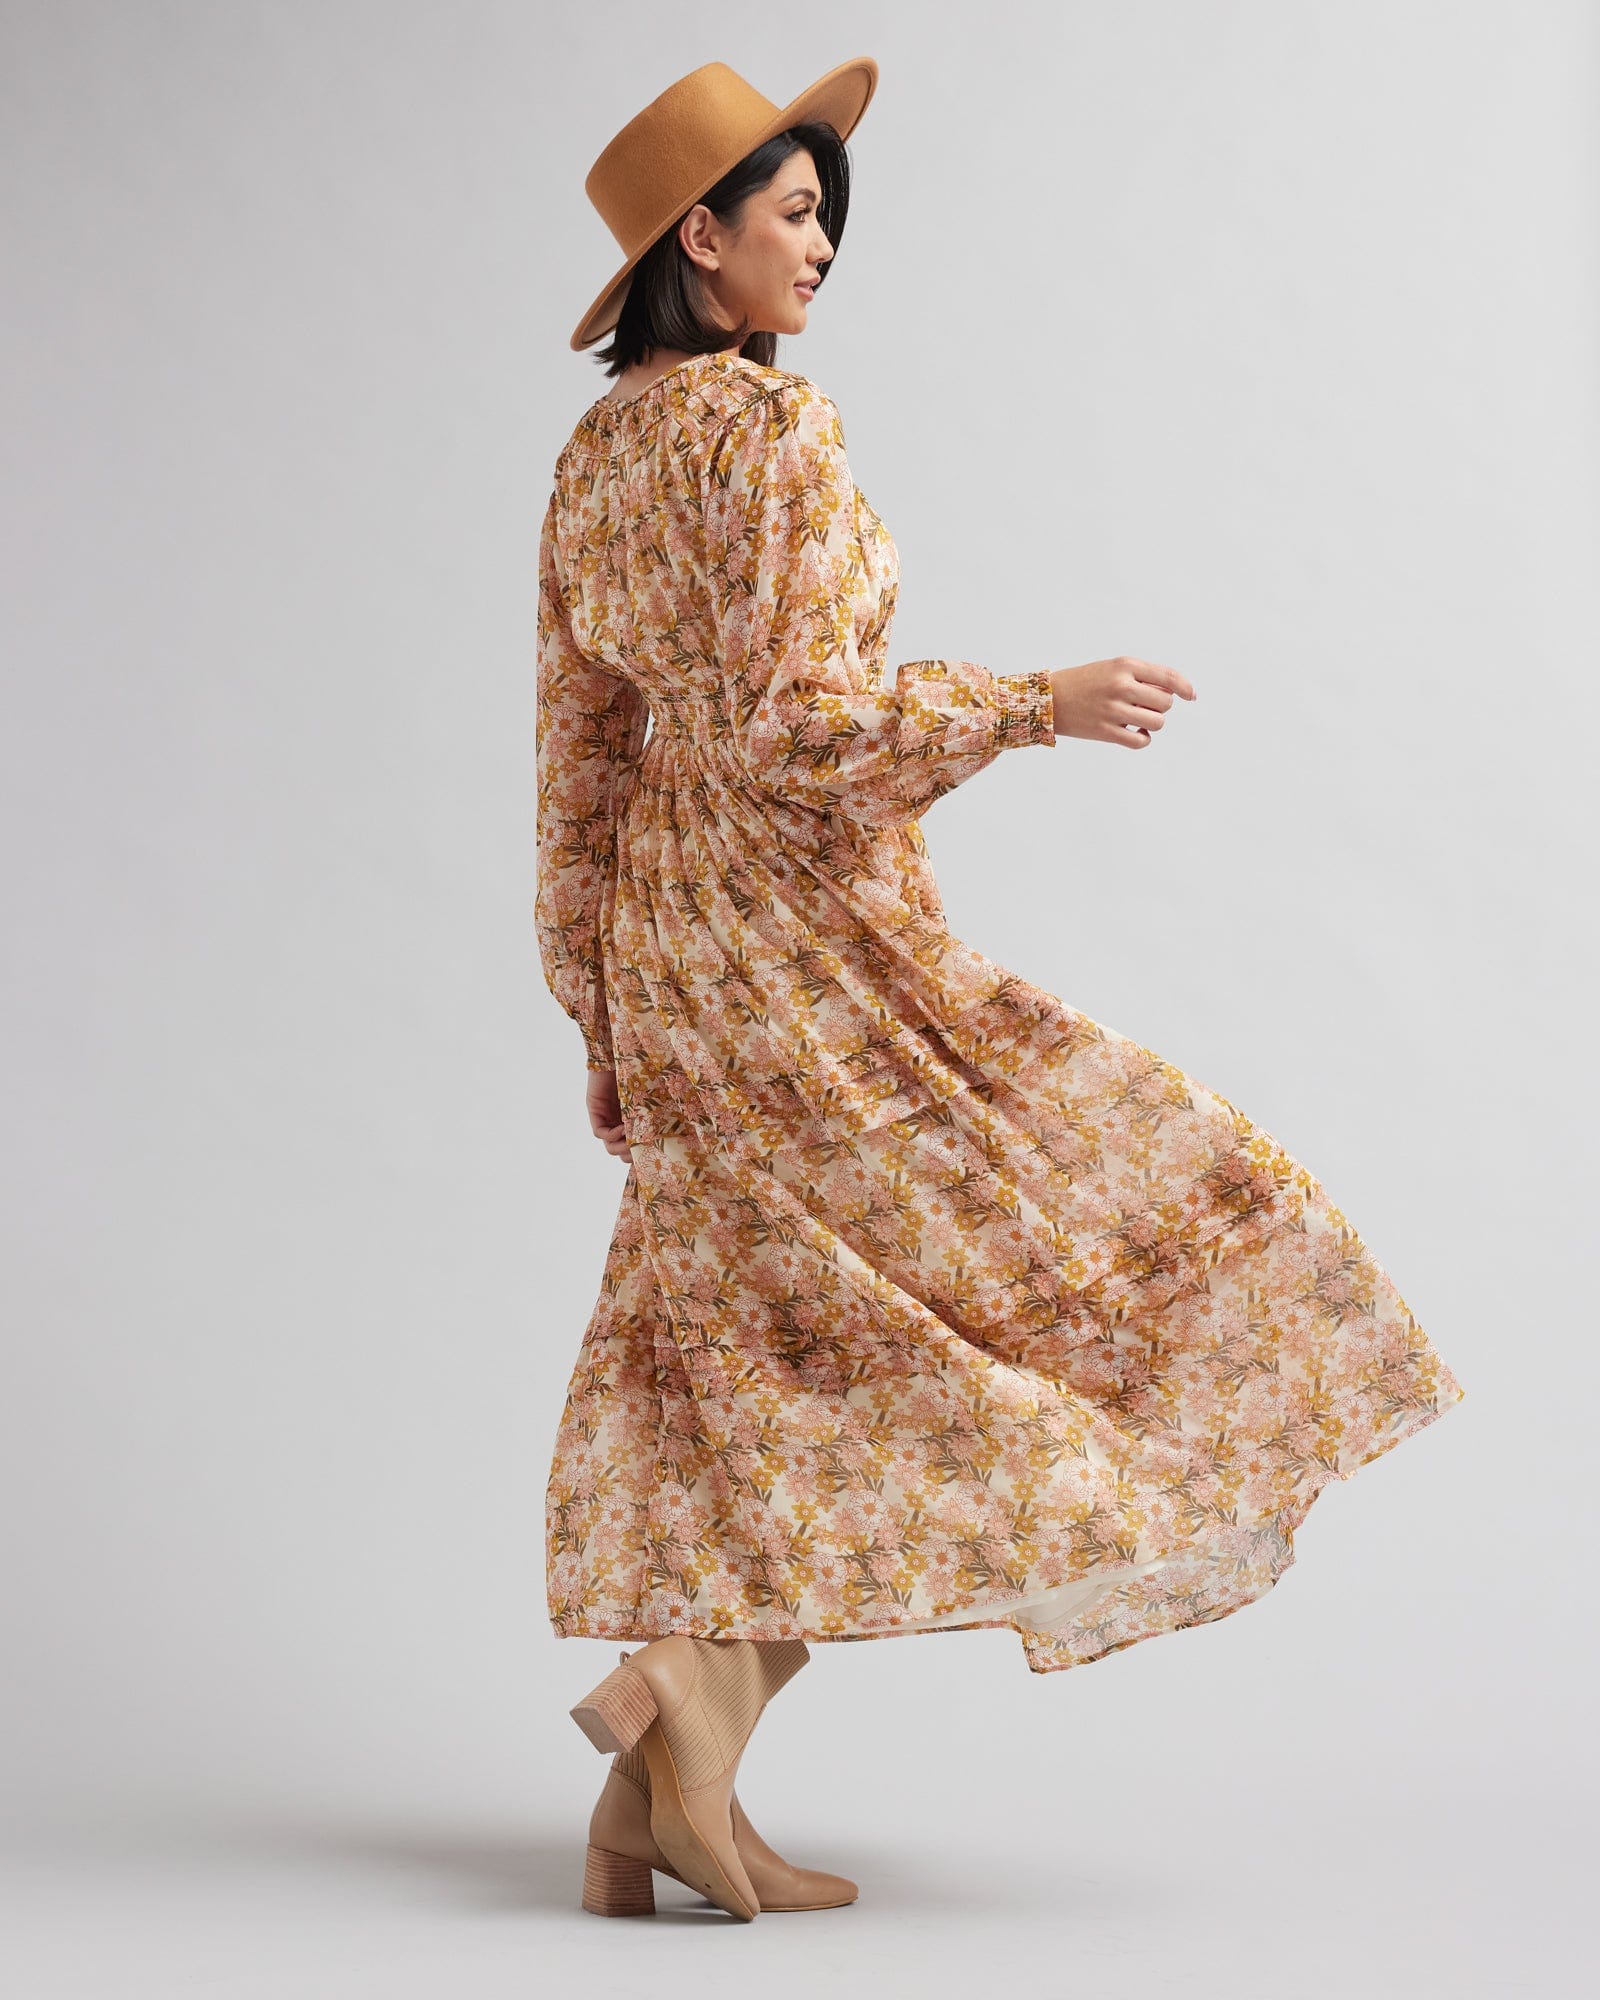 Woman in a long sleeve, tan floral printed maxi dress